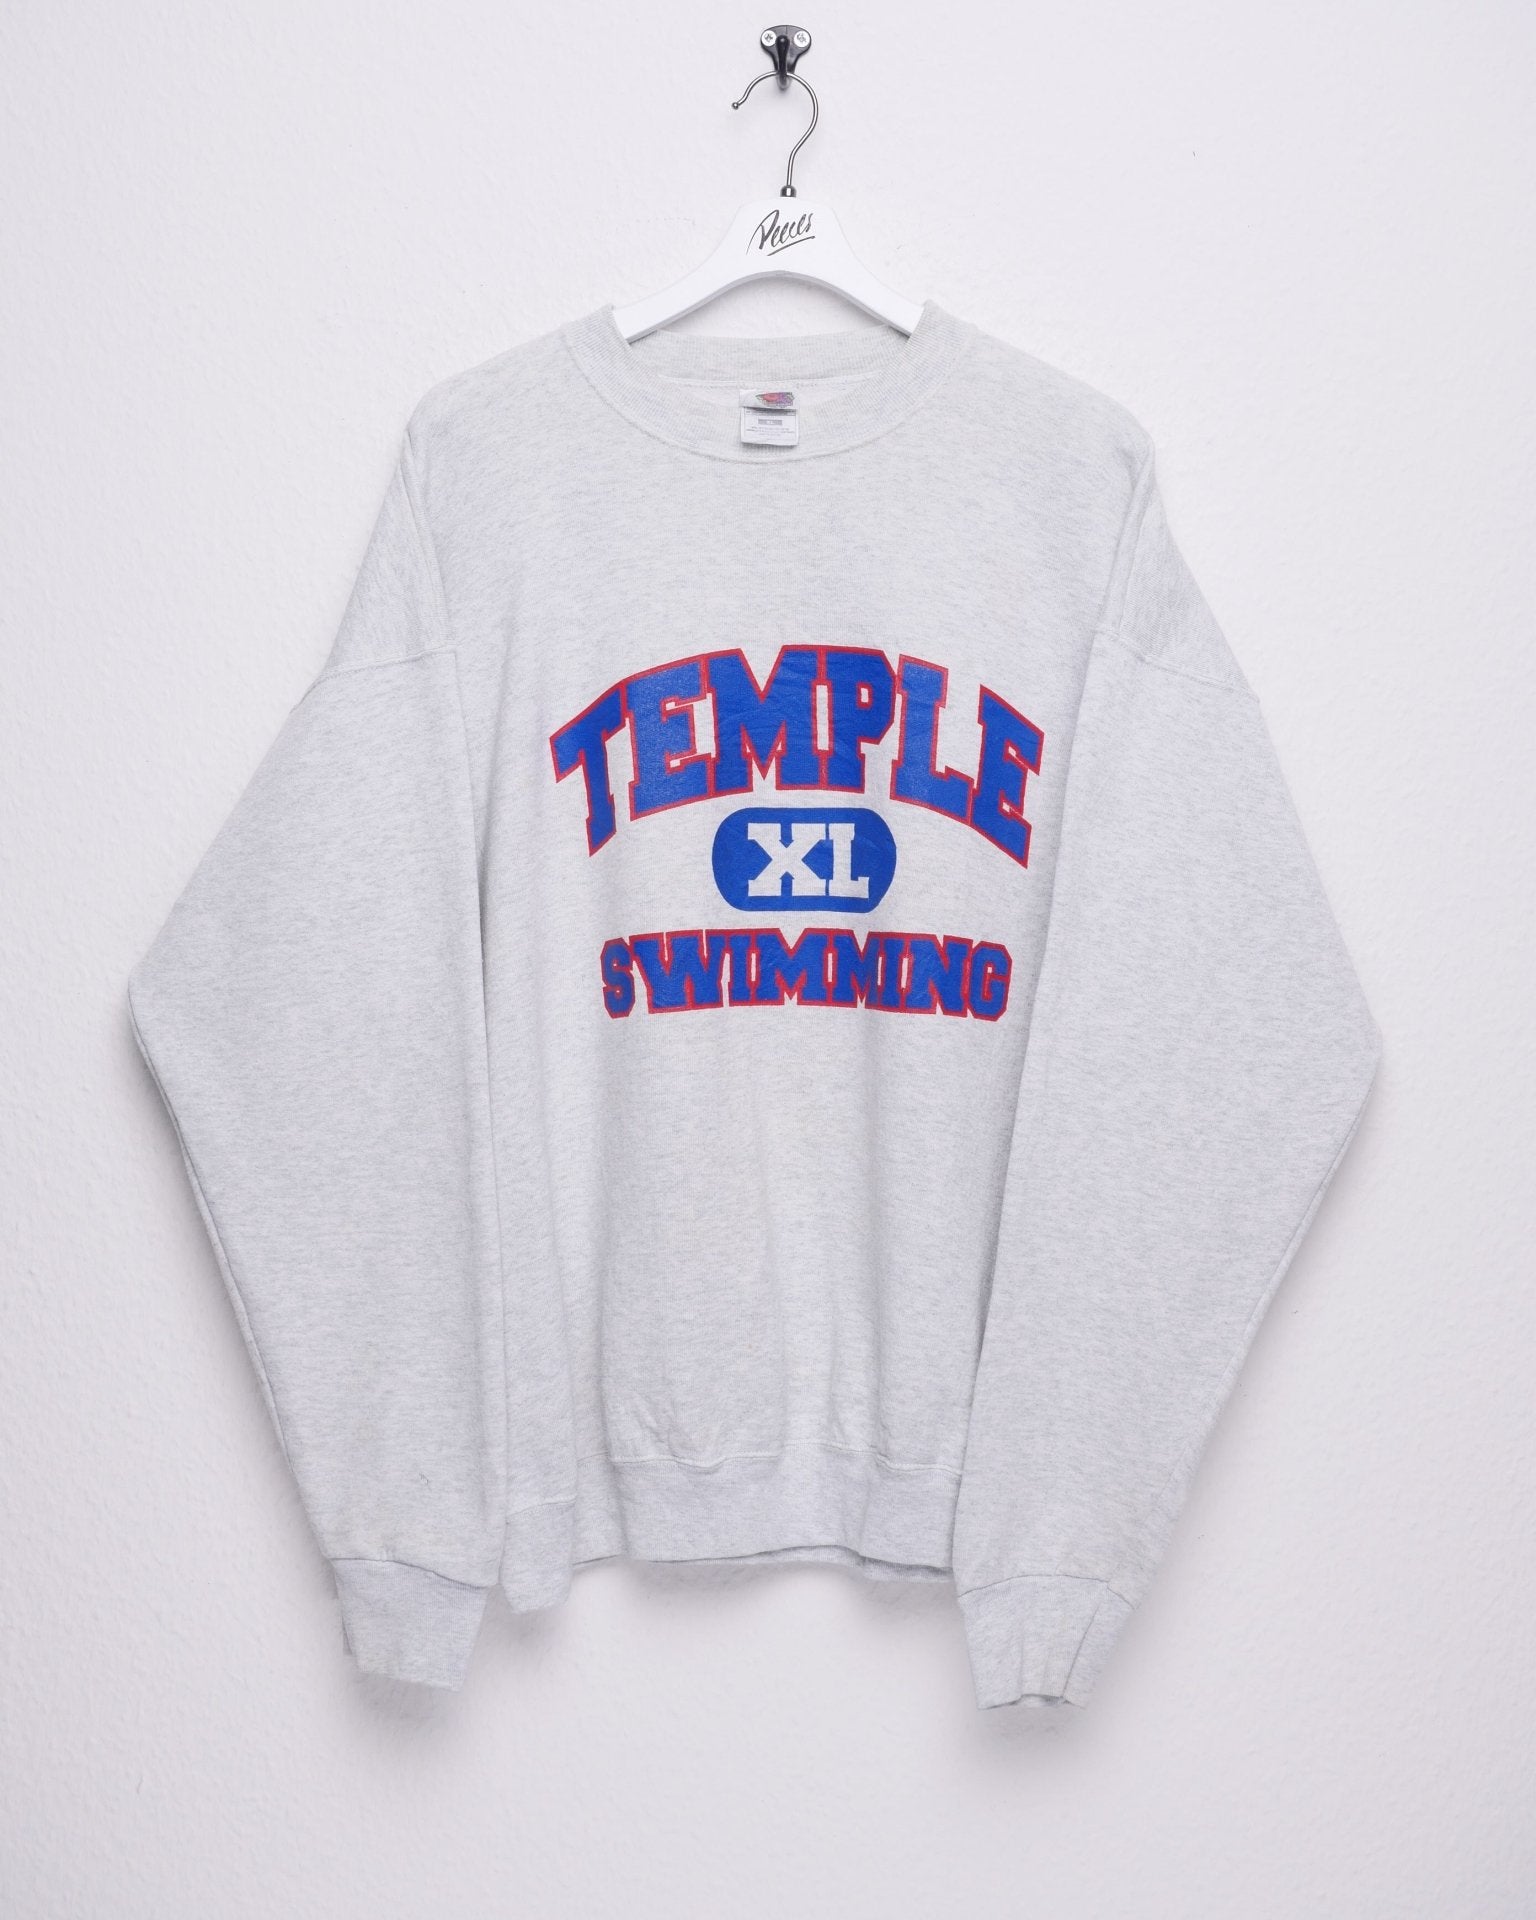 Temple Swimming printed Graphic Sweater - Peeces